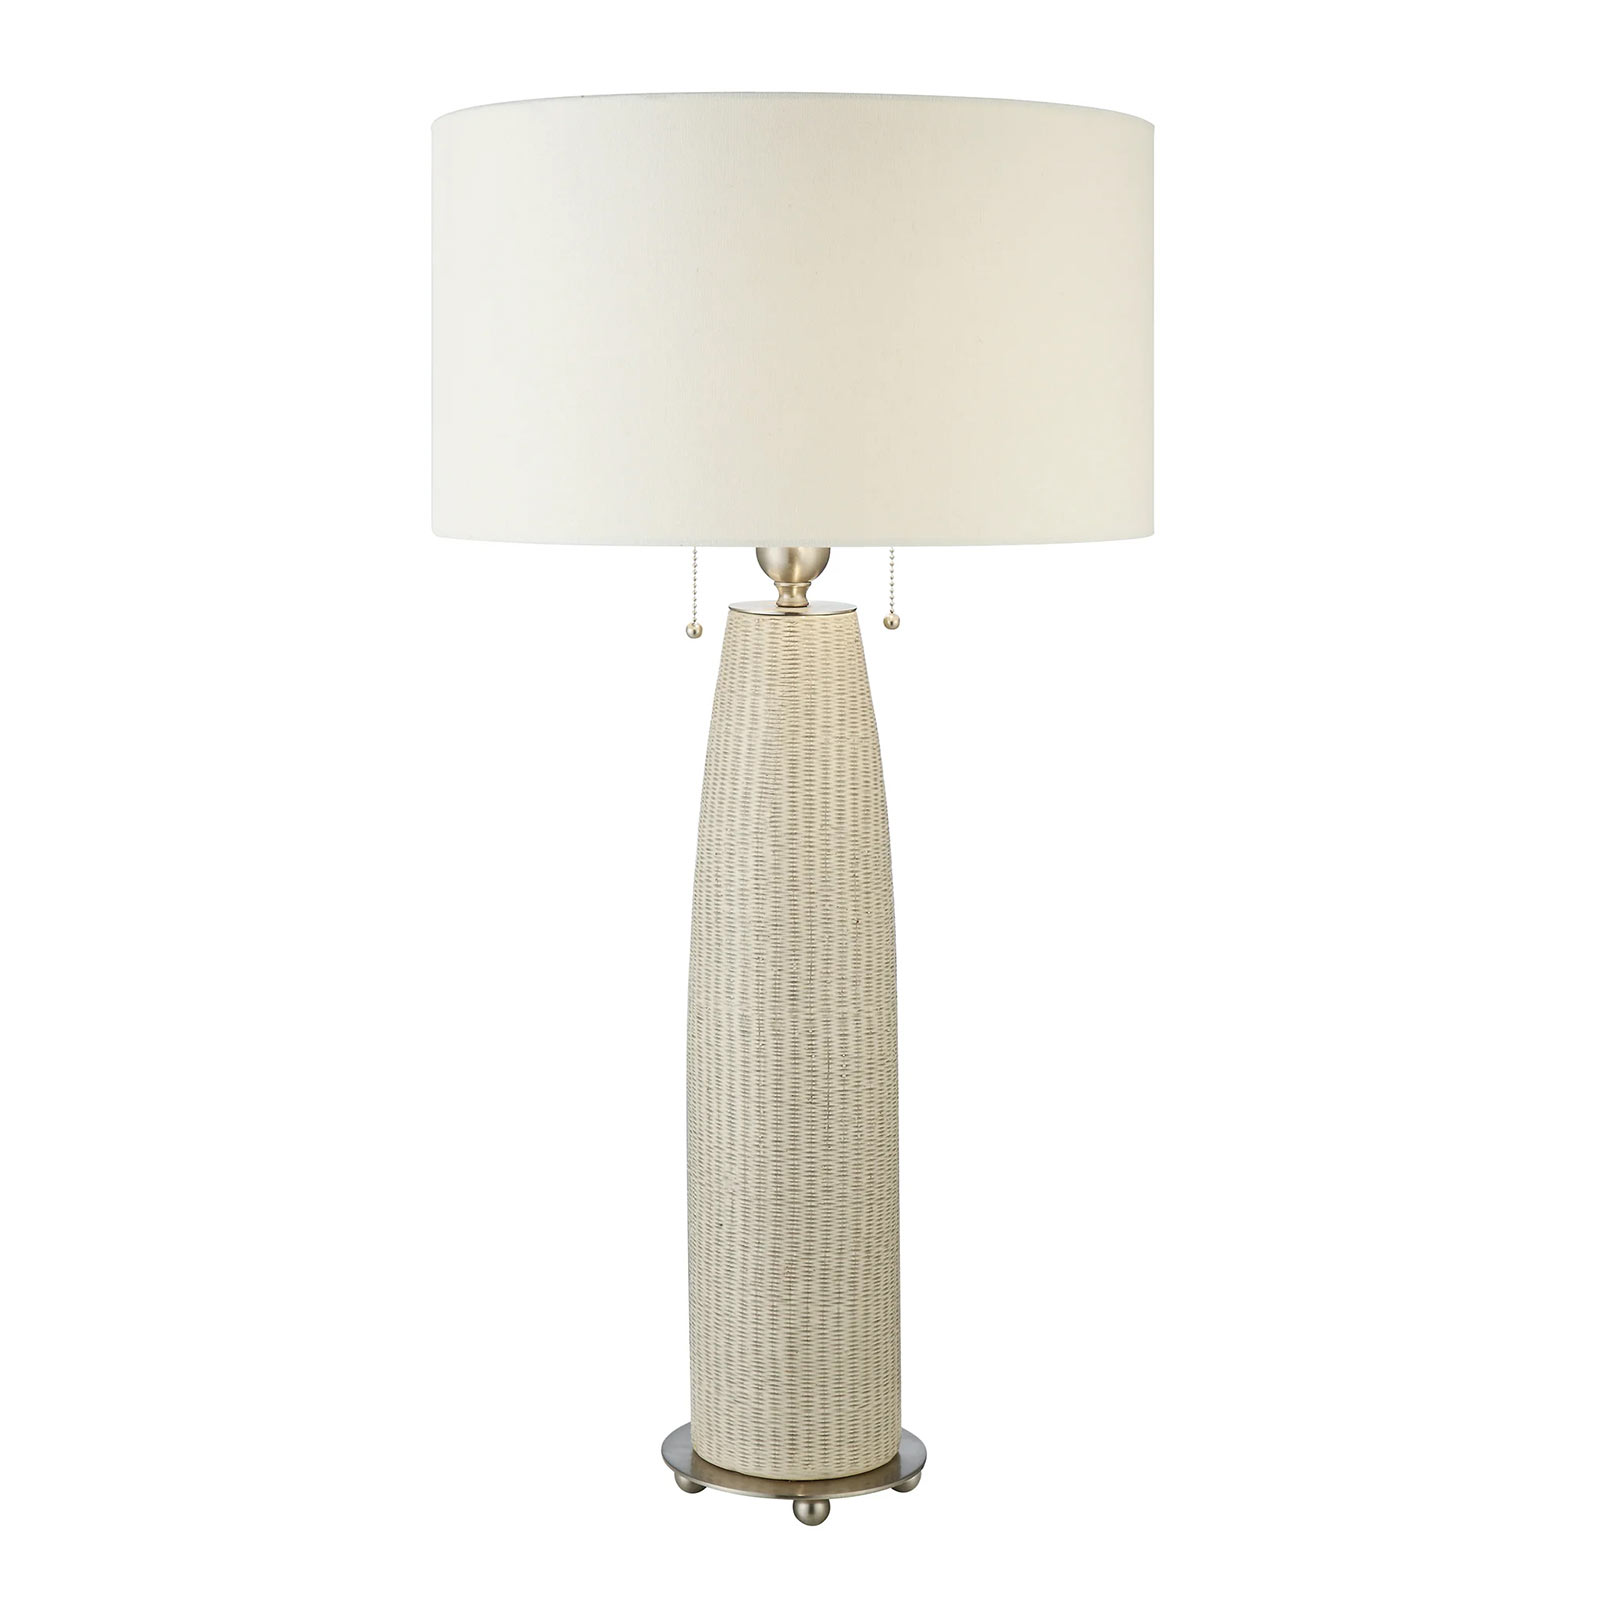 Crestview Collection Barclay Table Lamp